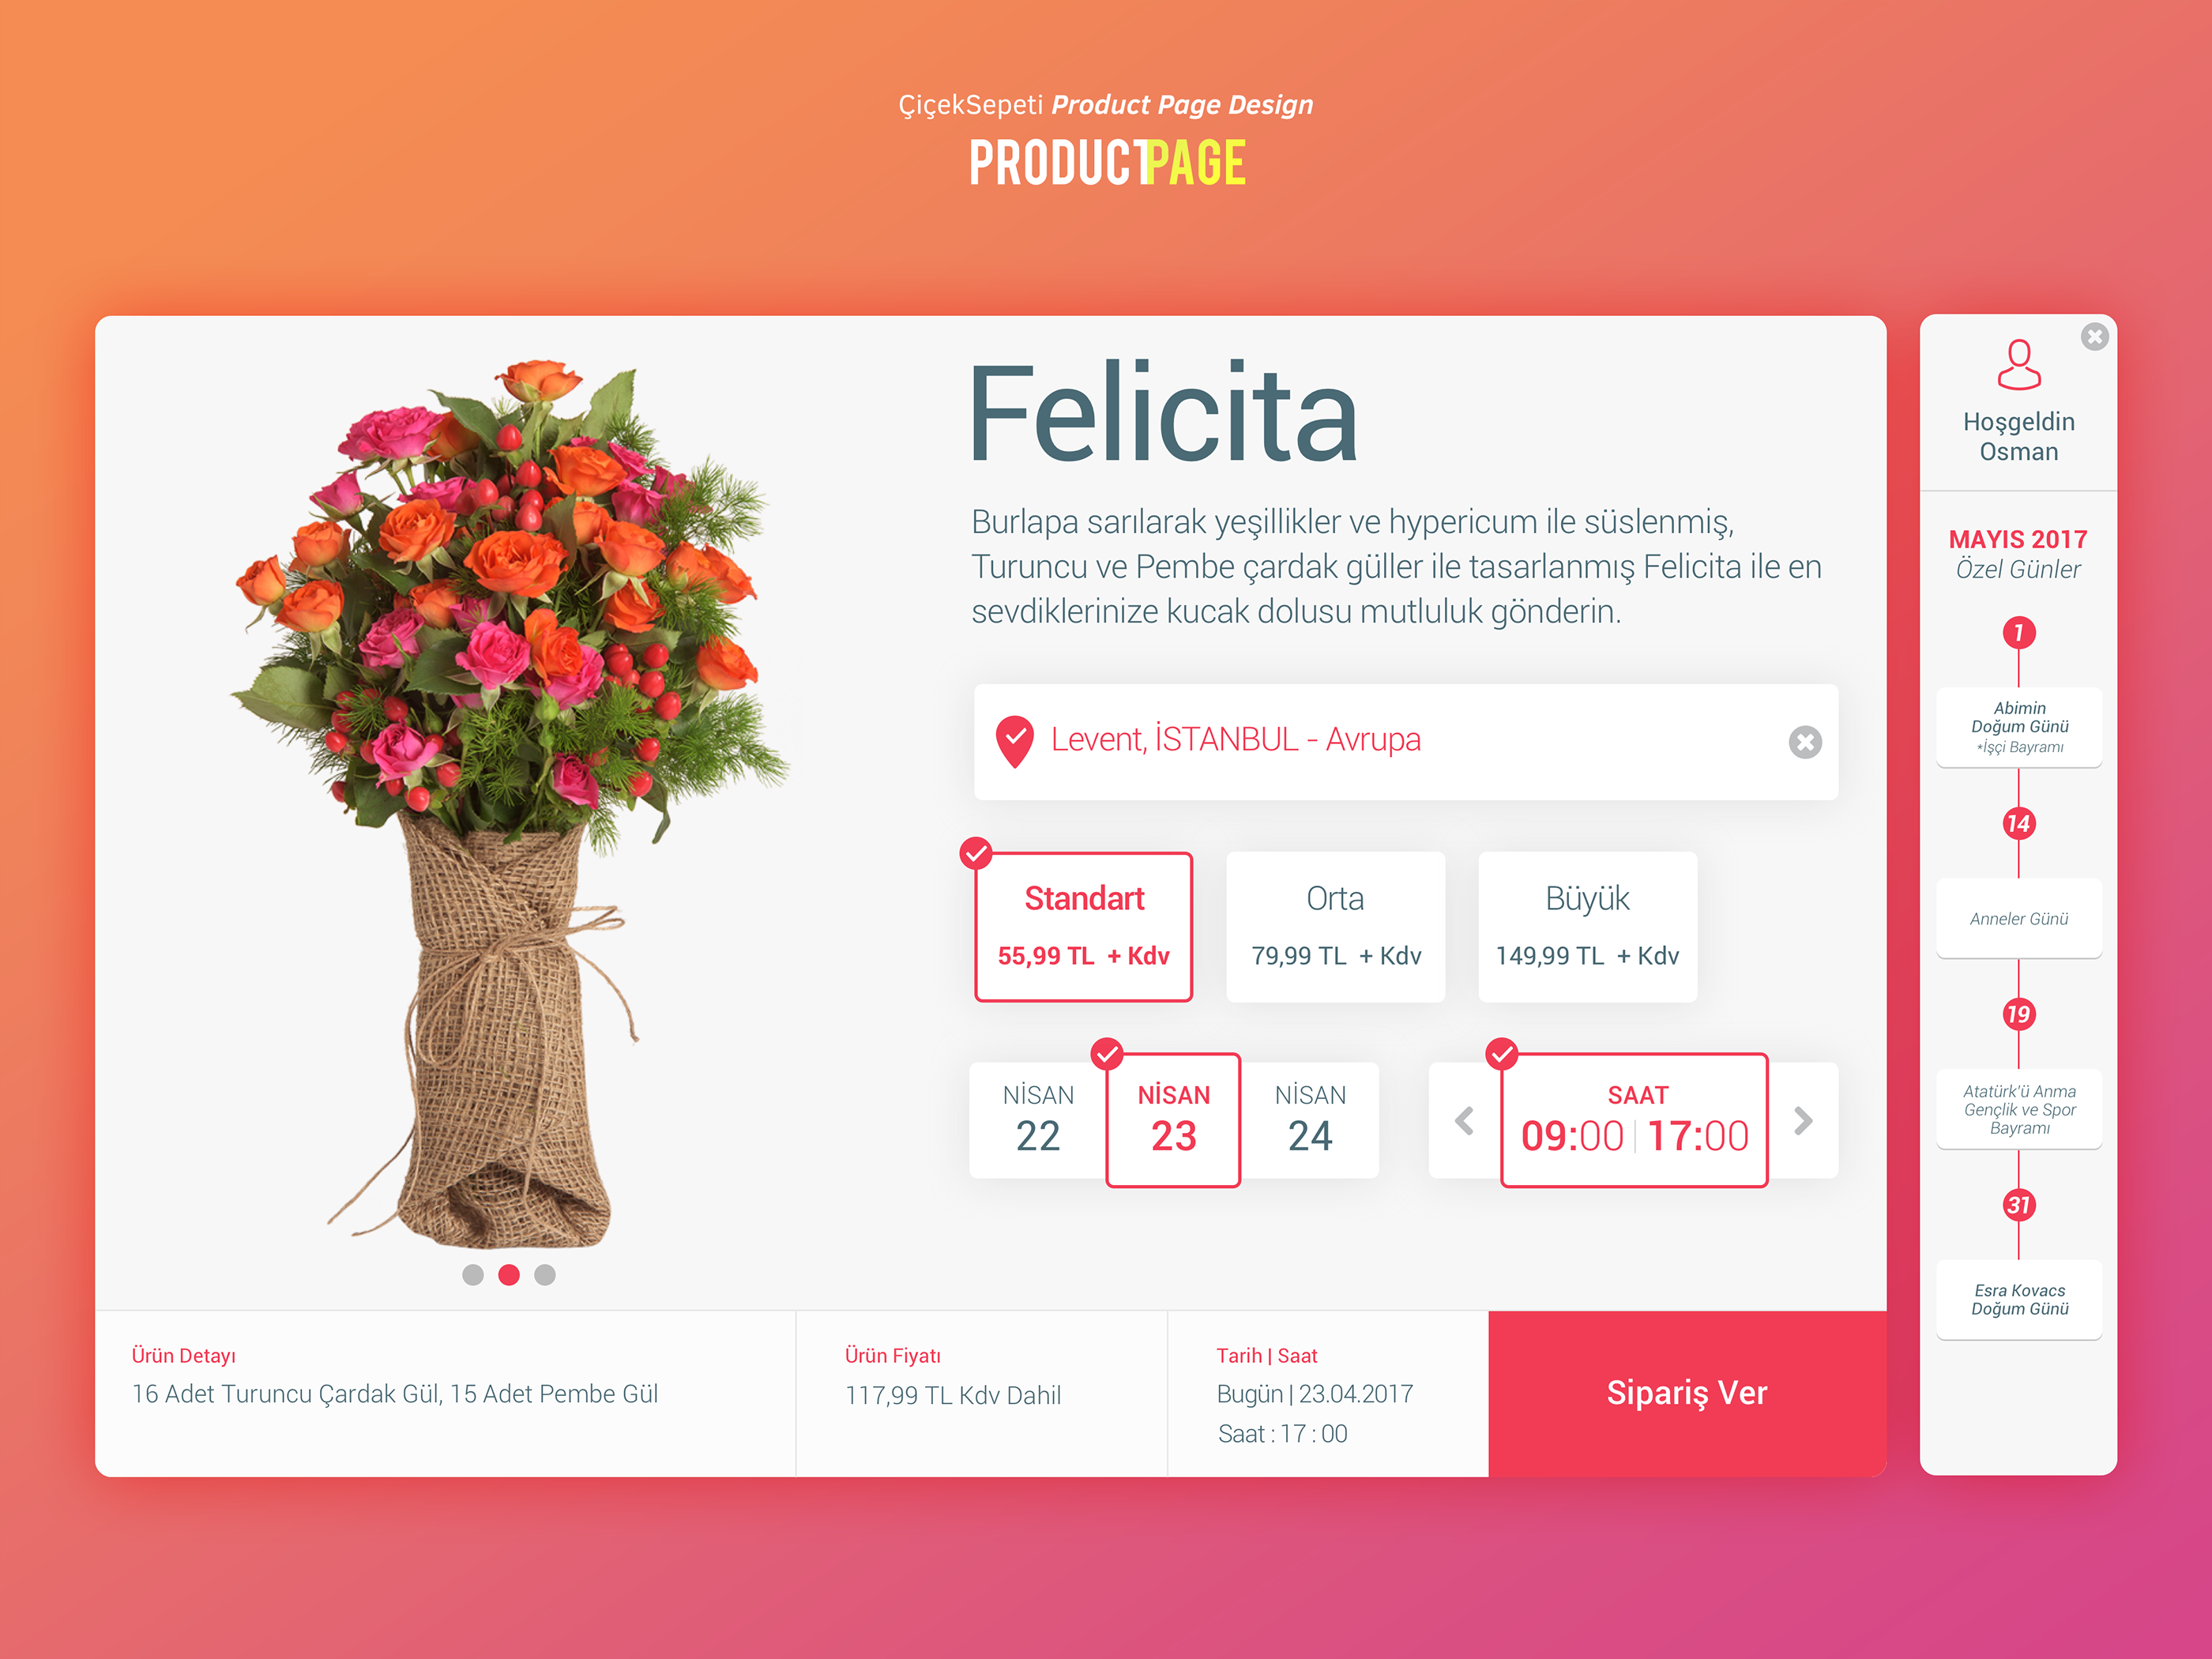 Product Page Design. Product Card. Product Card Design. Product Card Design UI. Product card view viewid